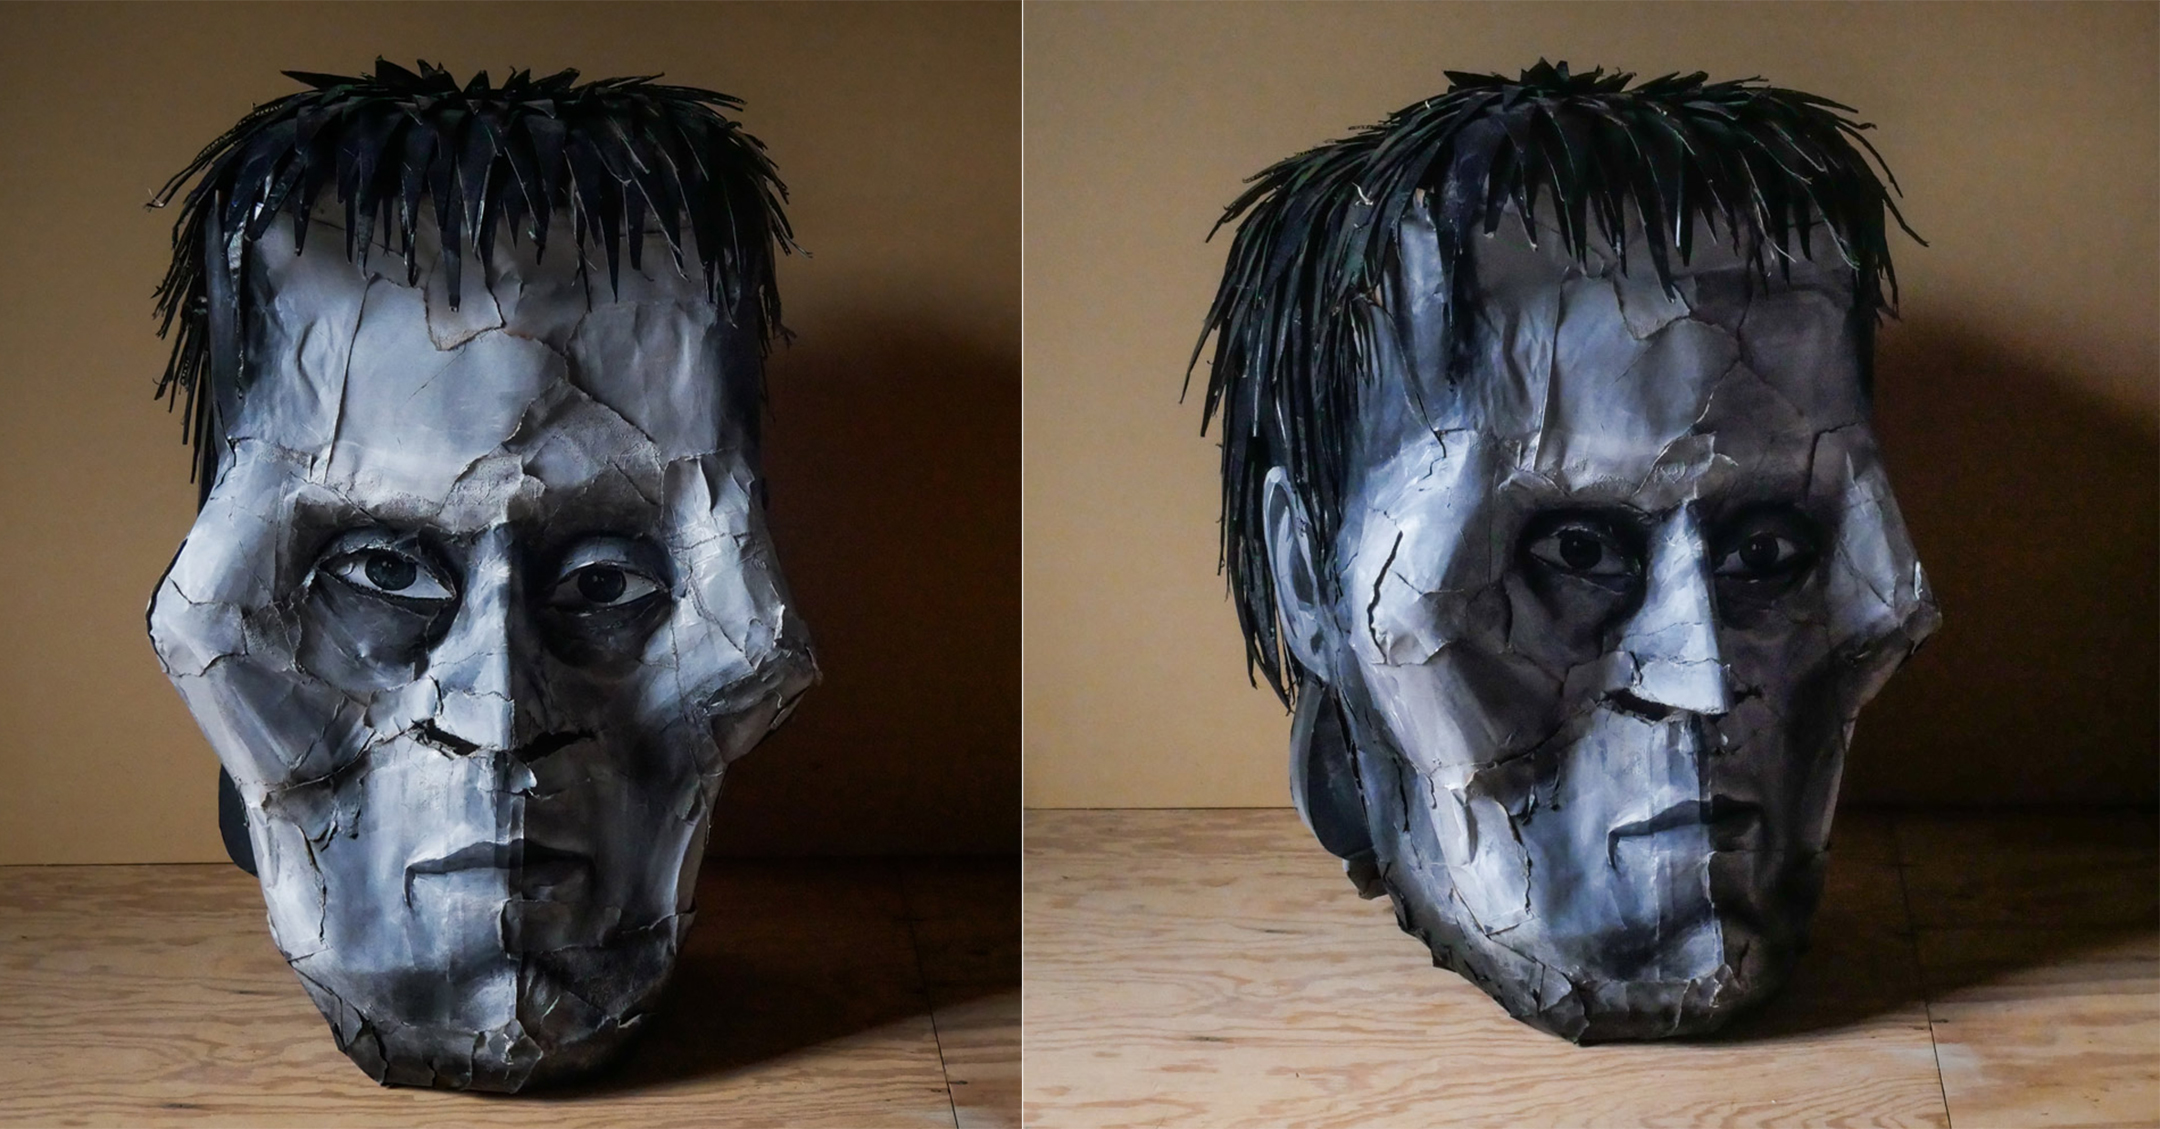 Two photos of a papier-mâché head of lurch from the Addams family 